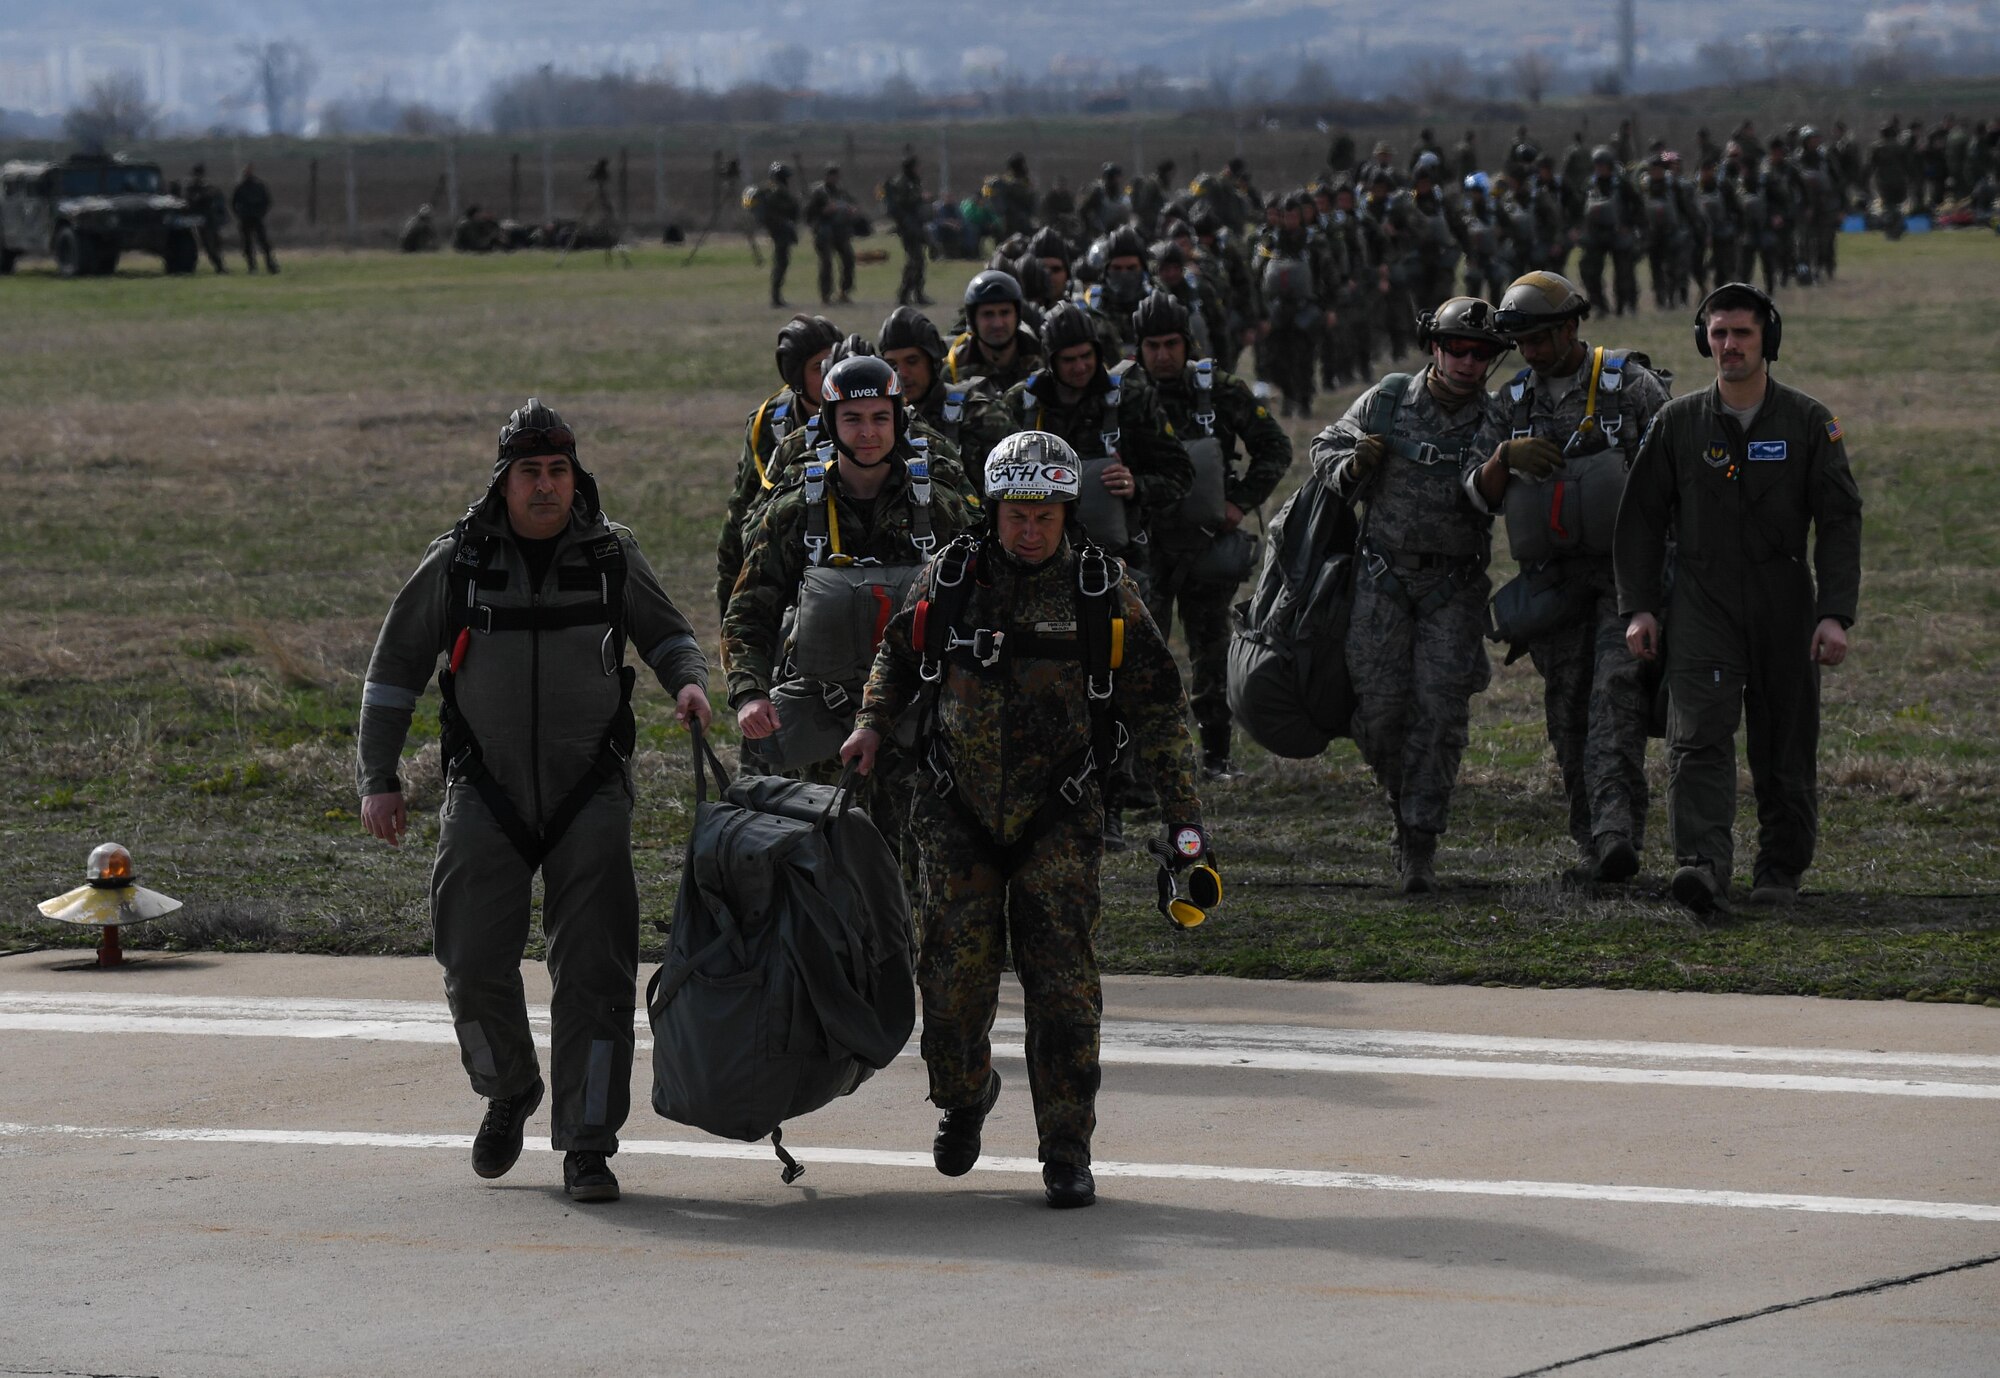 Exercise Thracian Spring 17 personnel load a C-130J Super Hercules in preparation for a personnel drop during Exercise Thracian Spring 17 at Plovdiv Regional Airport, Bulgaria, March 20, 2017. Airmen from the 37th Airlift Squadron, 435th Contingency Response Group, and 86th Airlift Wing, Ramstein Air Base, Germany, partnered with the Bulgarian military for the two-week exercise. The U.S. shares a commitment with Bulgaria, a NATO ally, to promote peace and close cooperation on countering a range of regional and global threats. (U.S. Air Force photo by Staff Sgt. Nesha Humes)